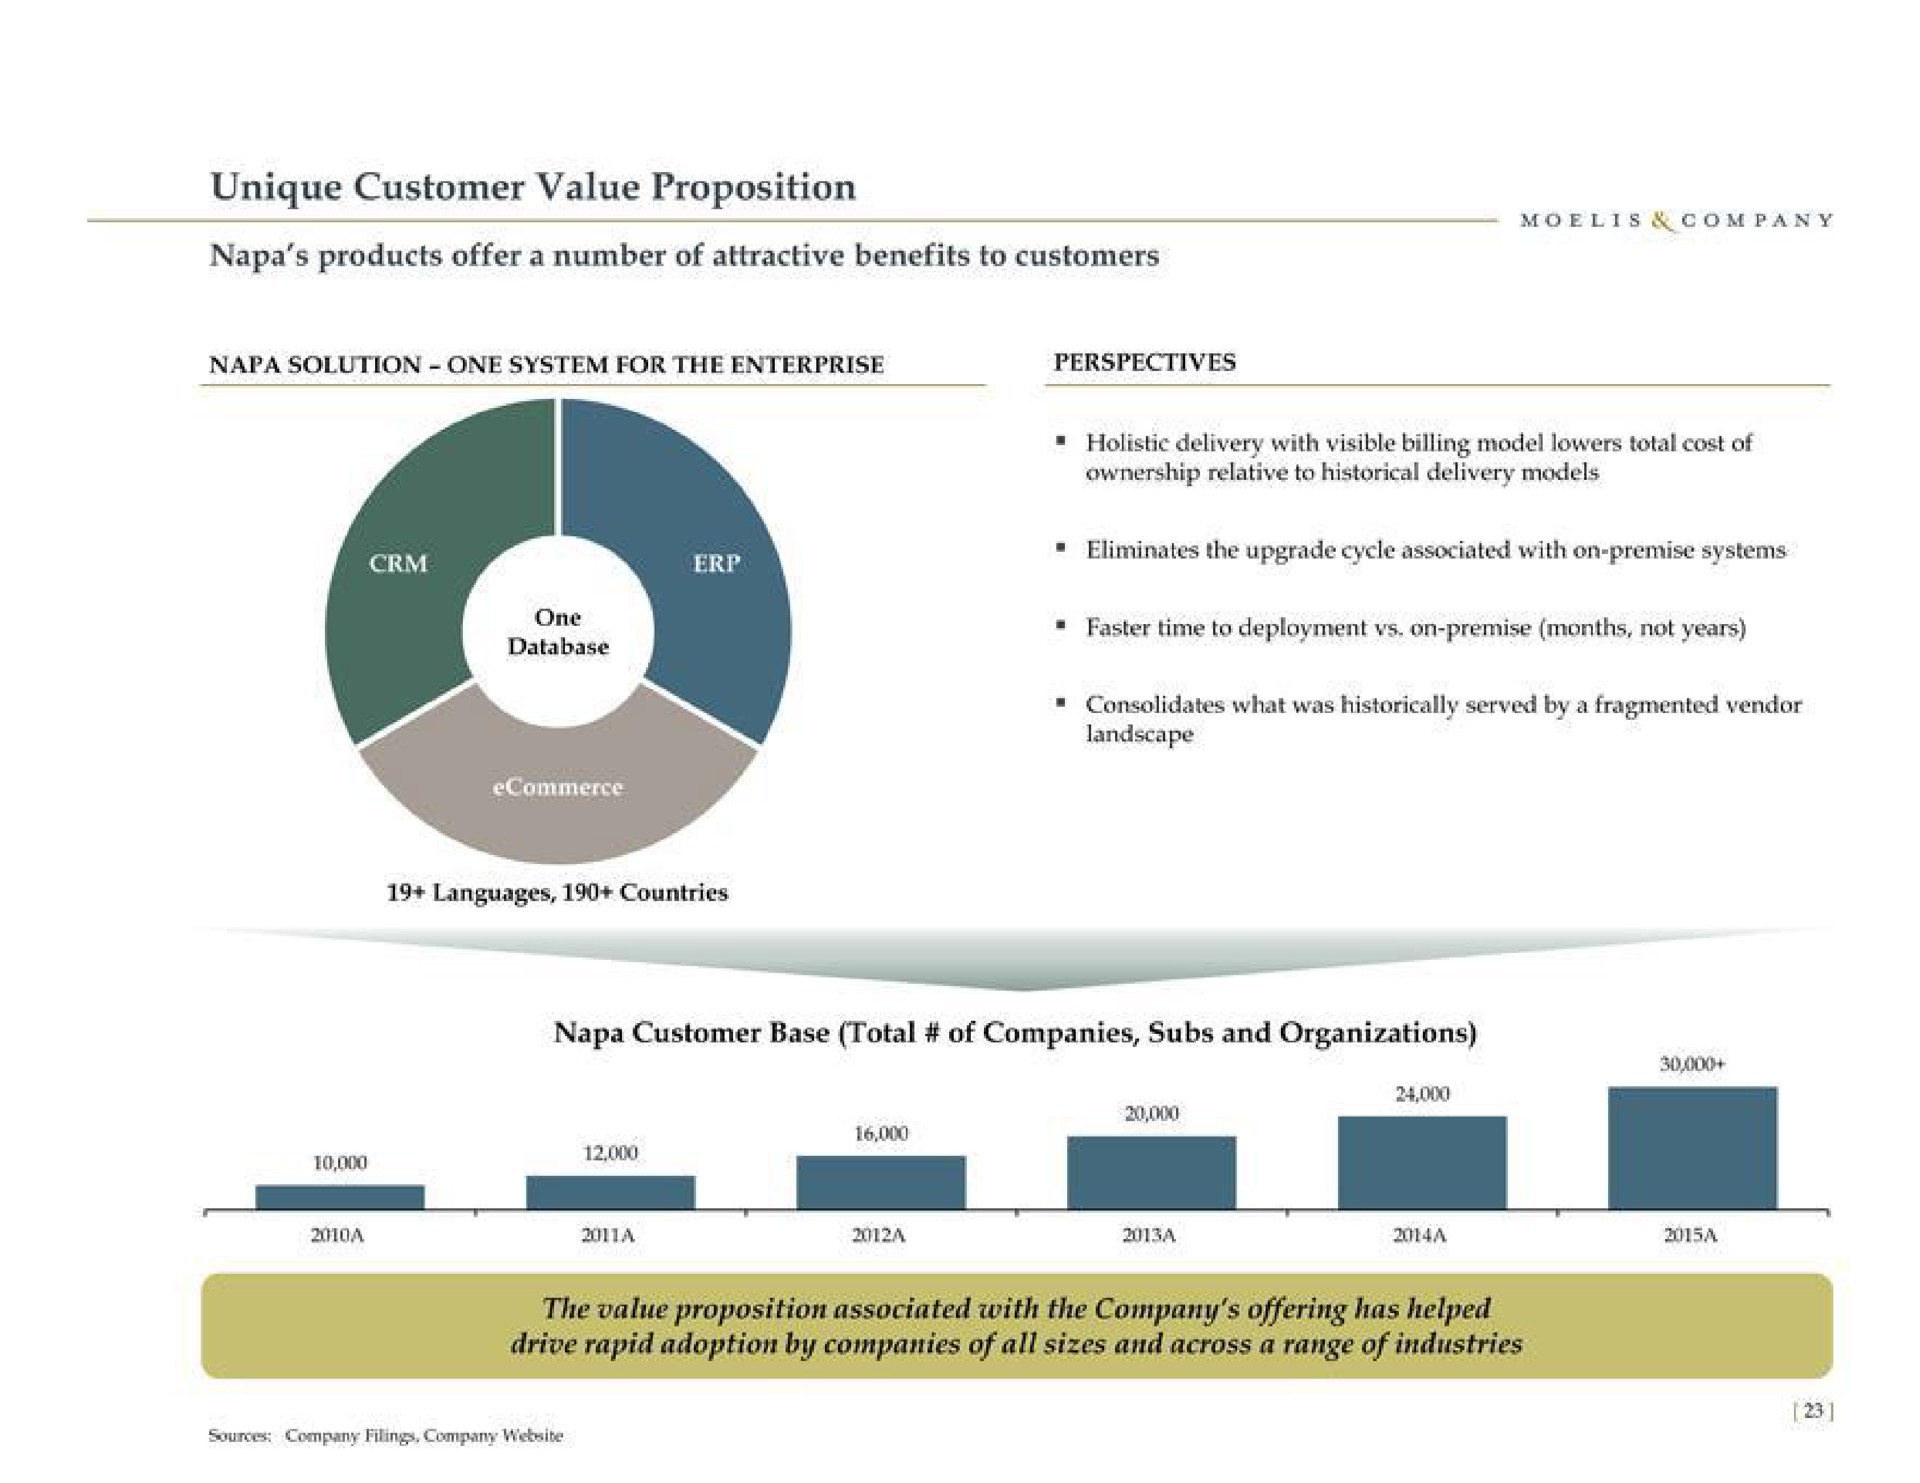 unique customer value proposition napa products offer a number of attractive benefits to customers | Moelis & Company